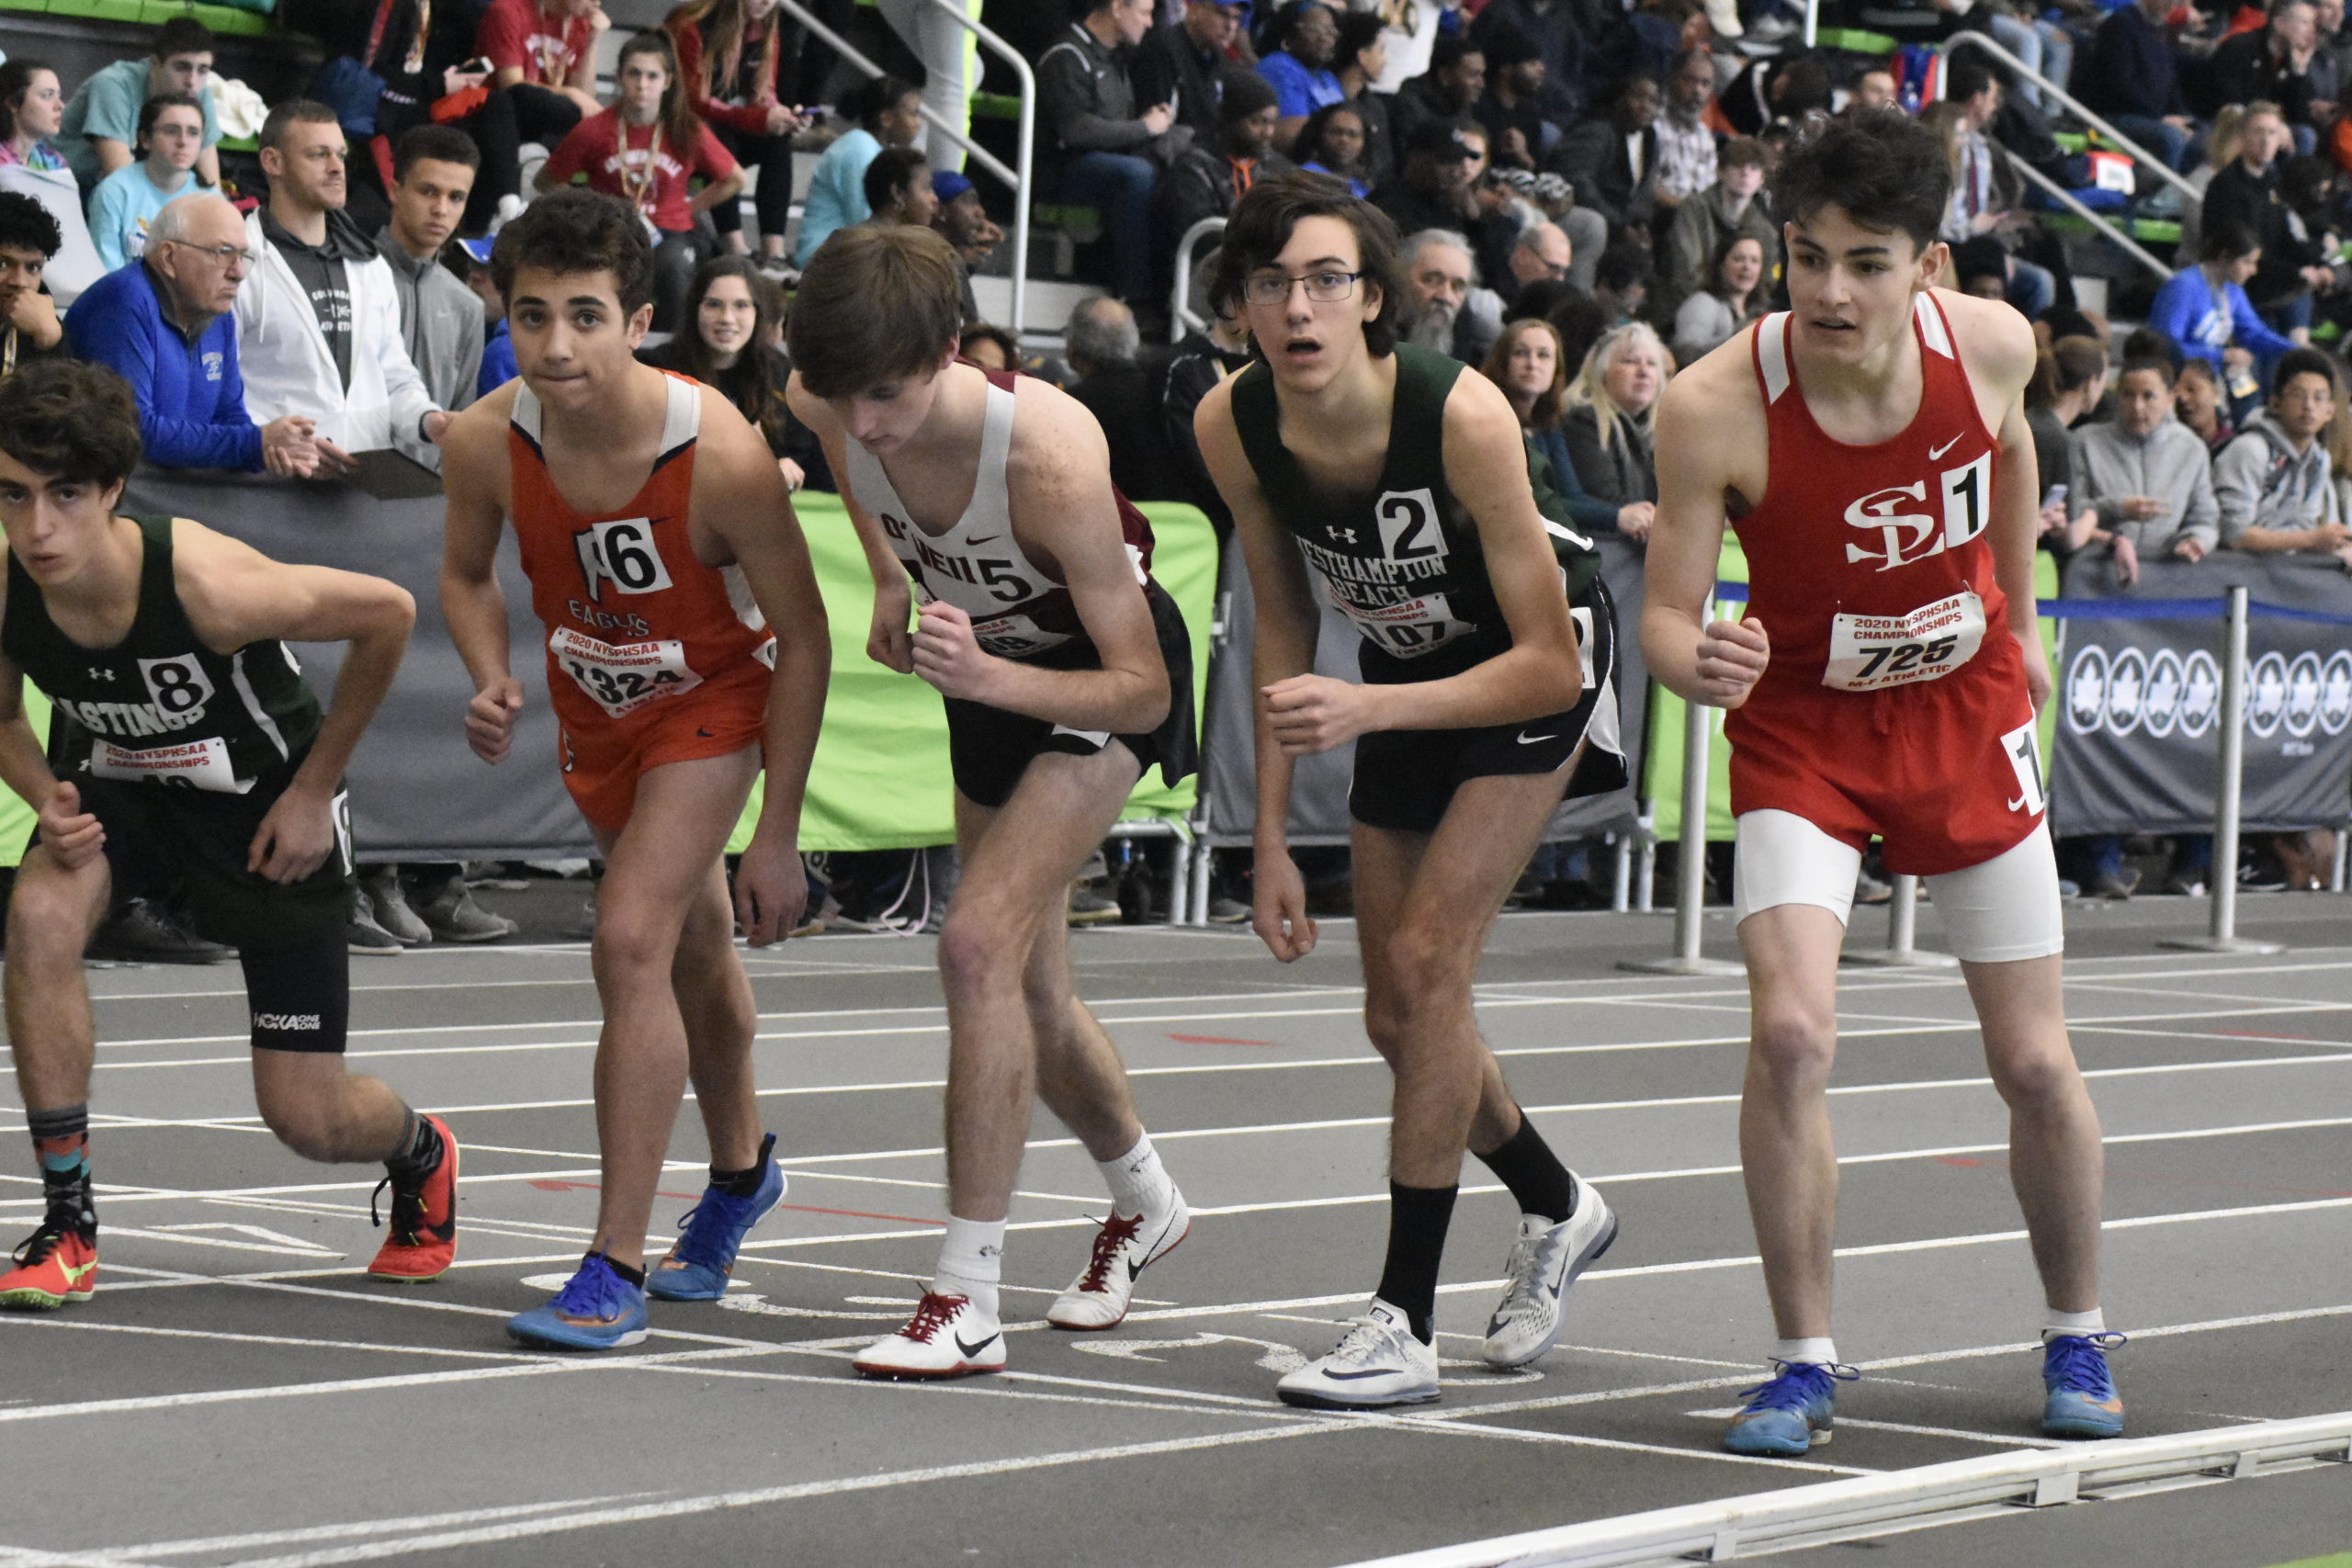 Westhampton Beach sophomore Gavin Ehlers is set to begin the 3,200-meter race at the New York State Indoor Track and Field Championships on Saturday.